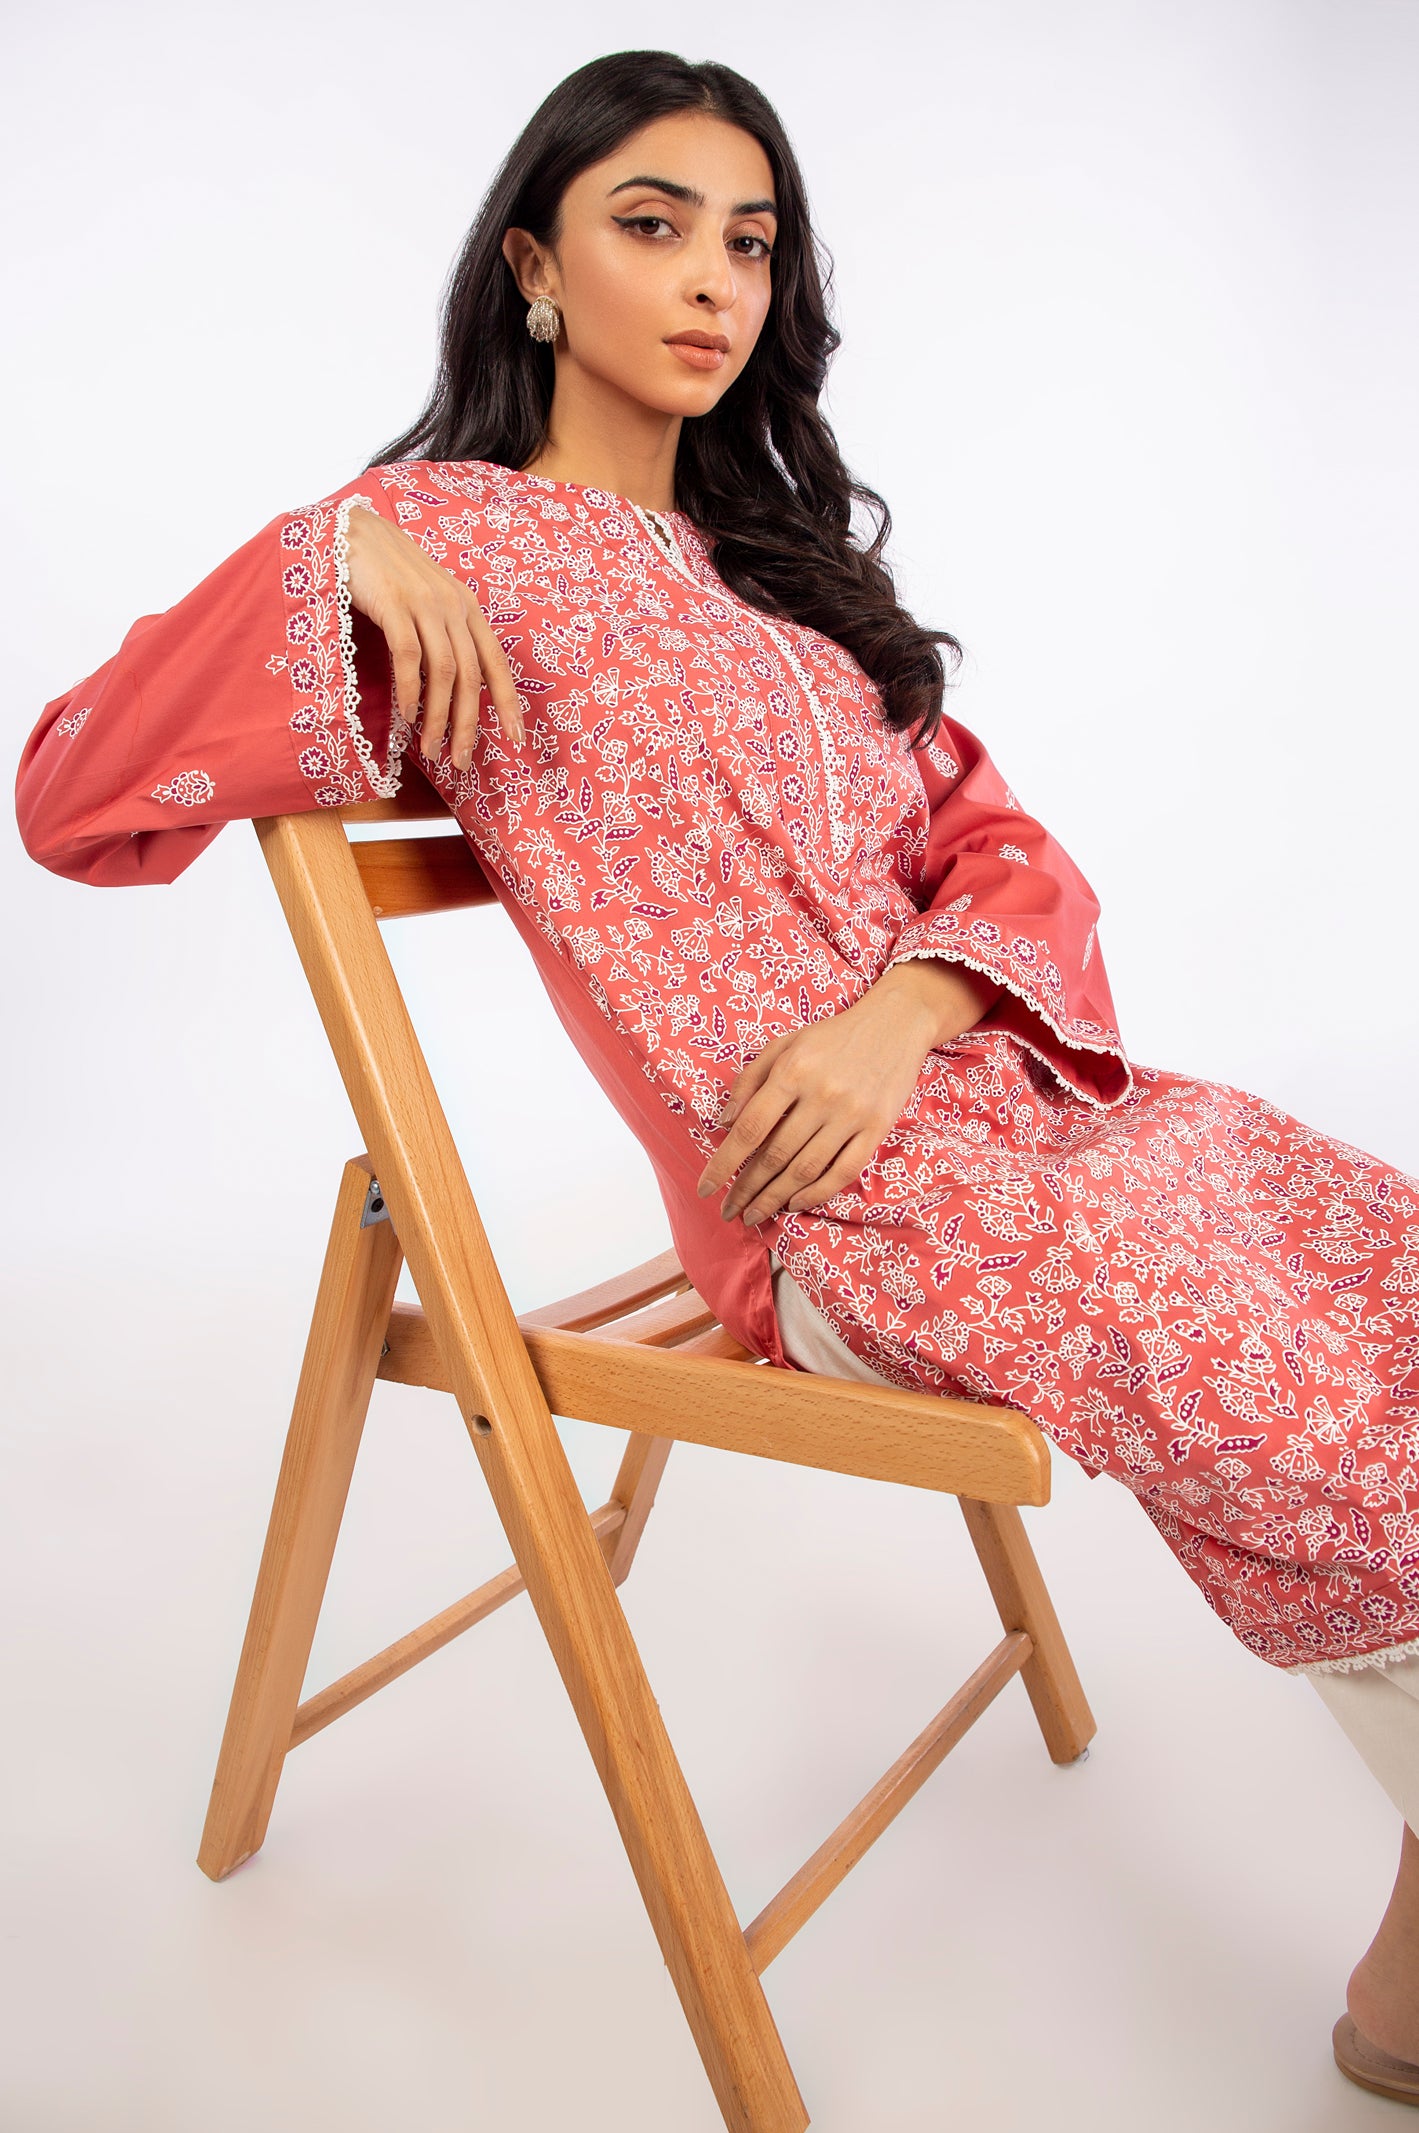 Peach Printed Kurti From Diners